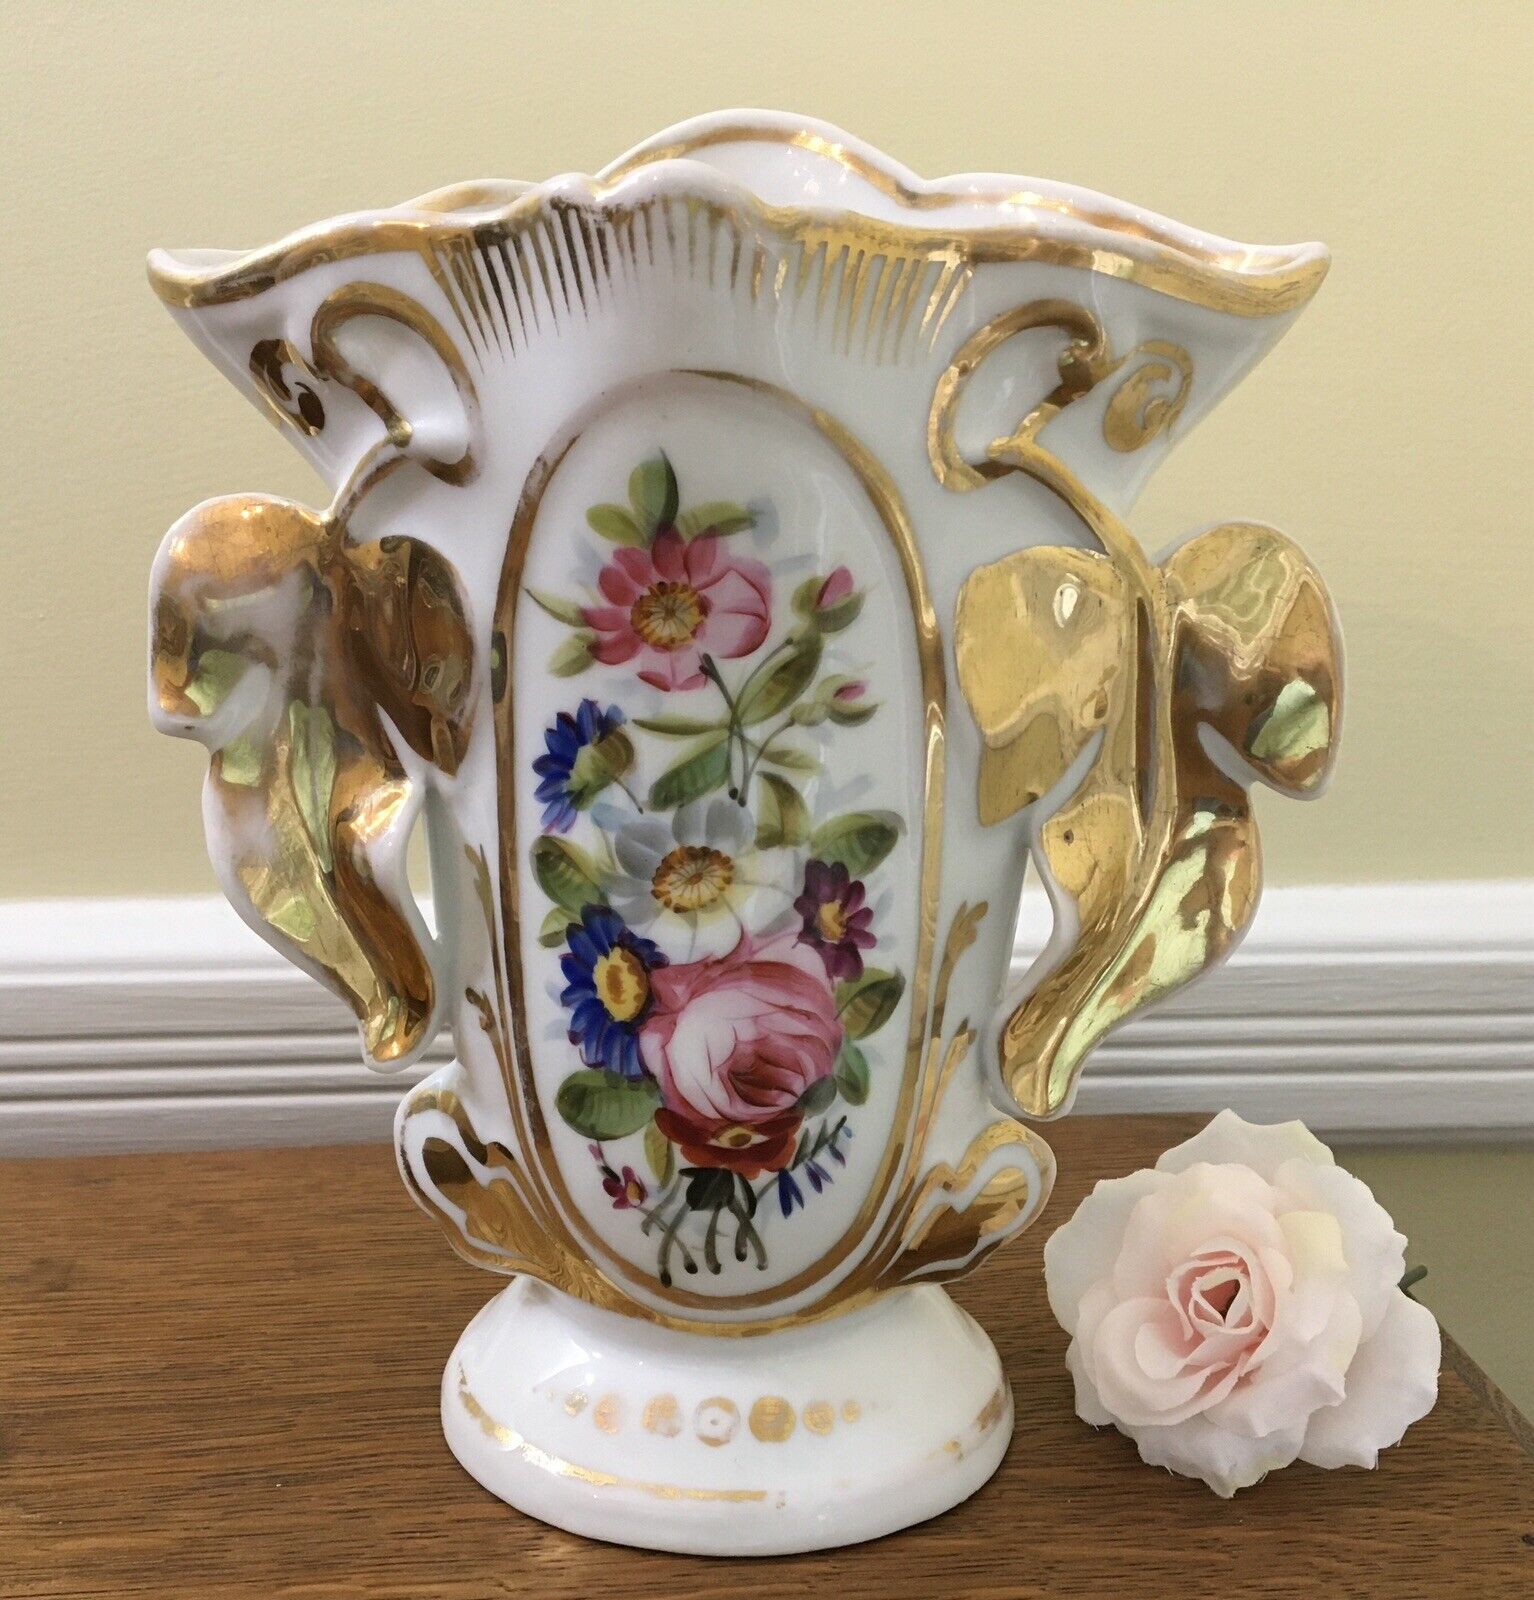 Lovely French Style Porcelain Wedding Vase with Handpainted Flowers & Shiny Gold